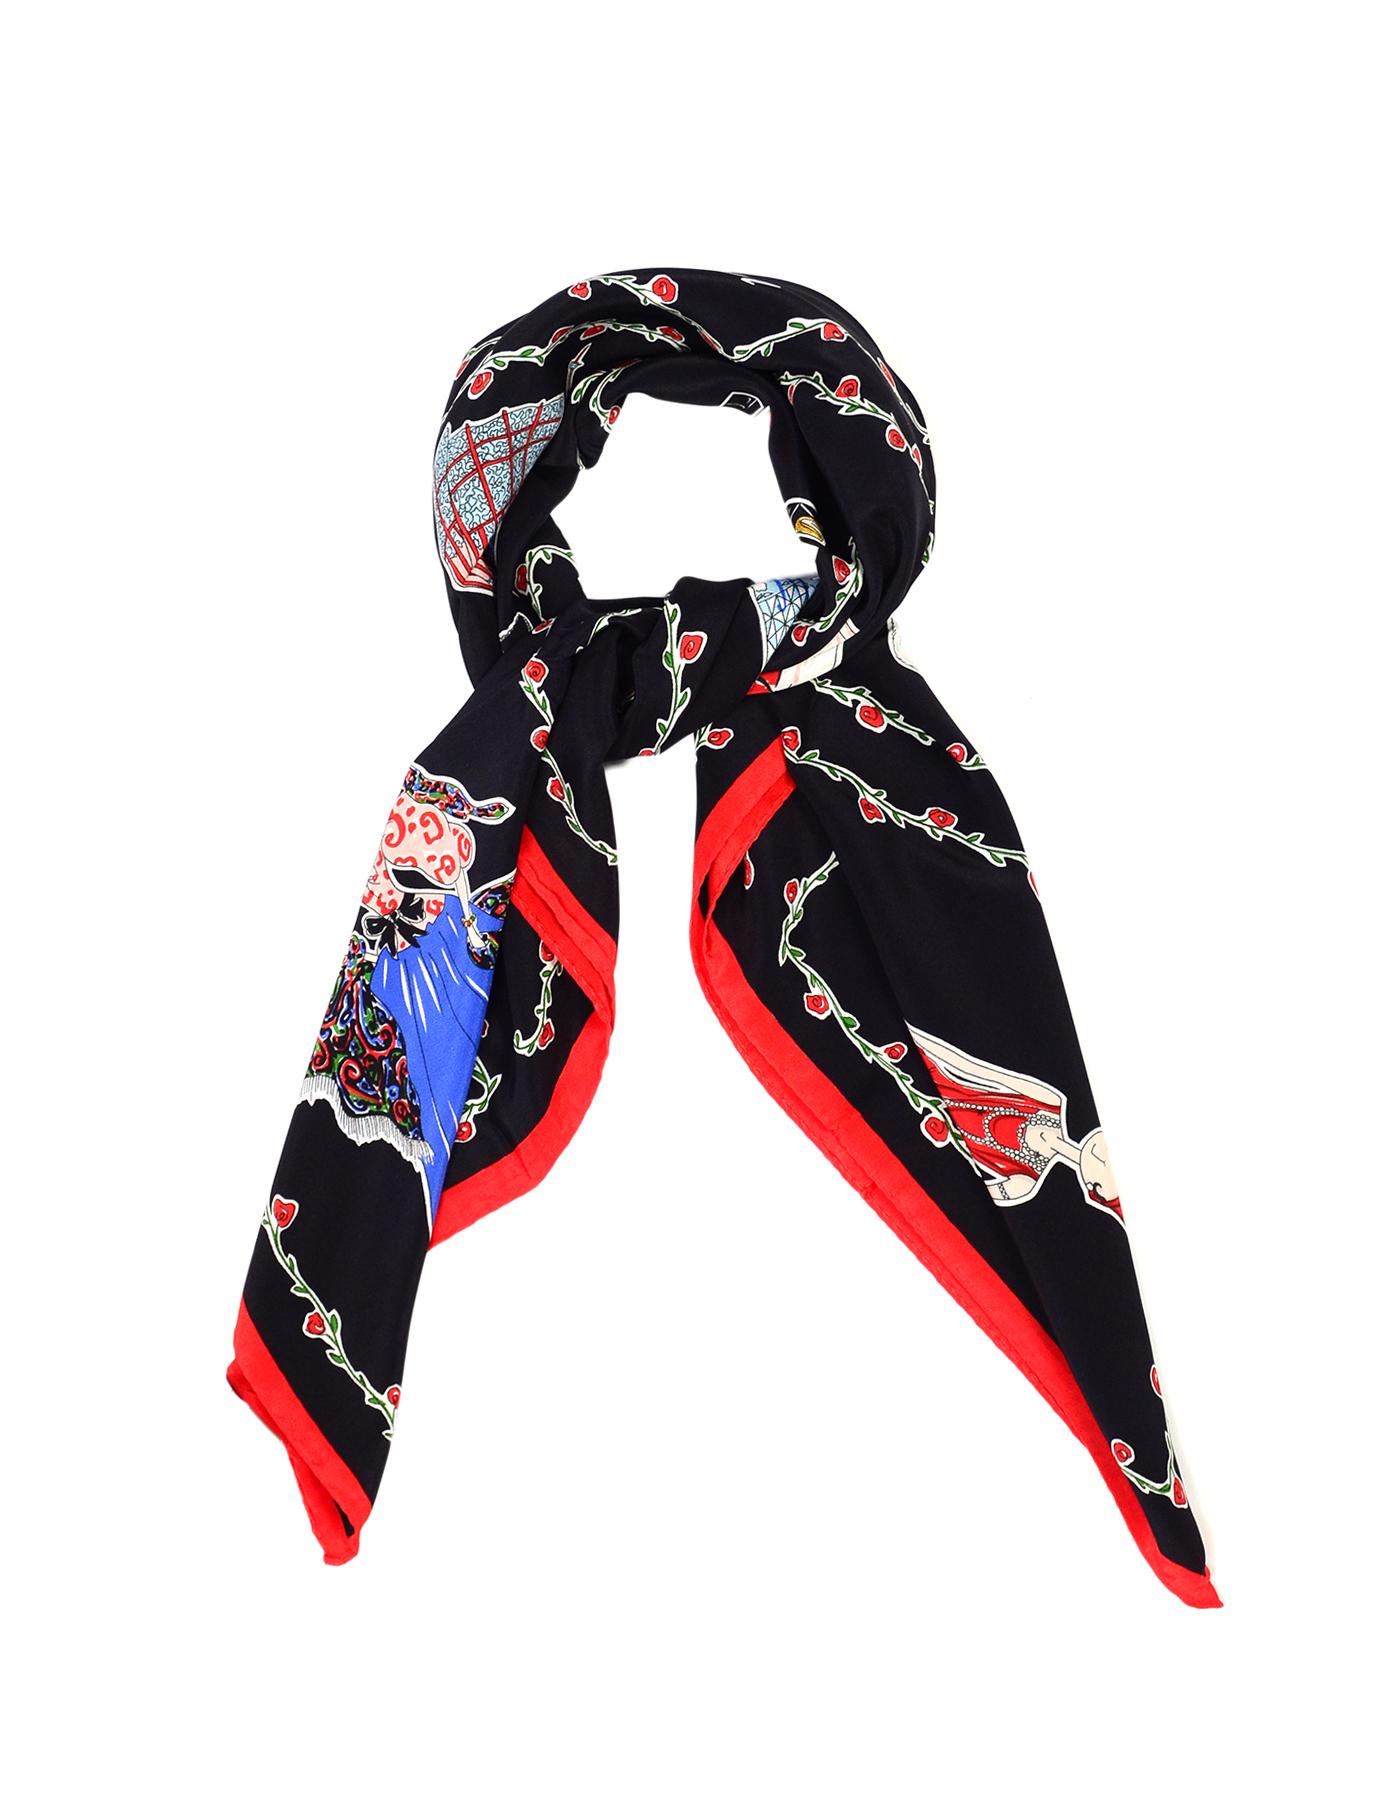 Moschino Black/Red Silk Olive Oil Scarf w/ Envelope 

Made In: Italy
Color: Black/red
Materials: 100% silk
Overall Condition: Excellent pre-owned condition 
Includes:  Moschino envelope box

Measurements: 
34